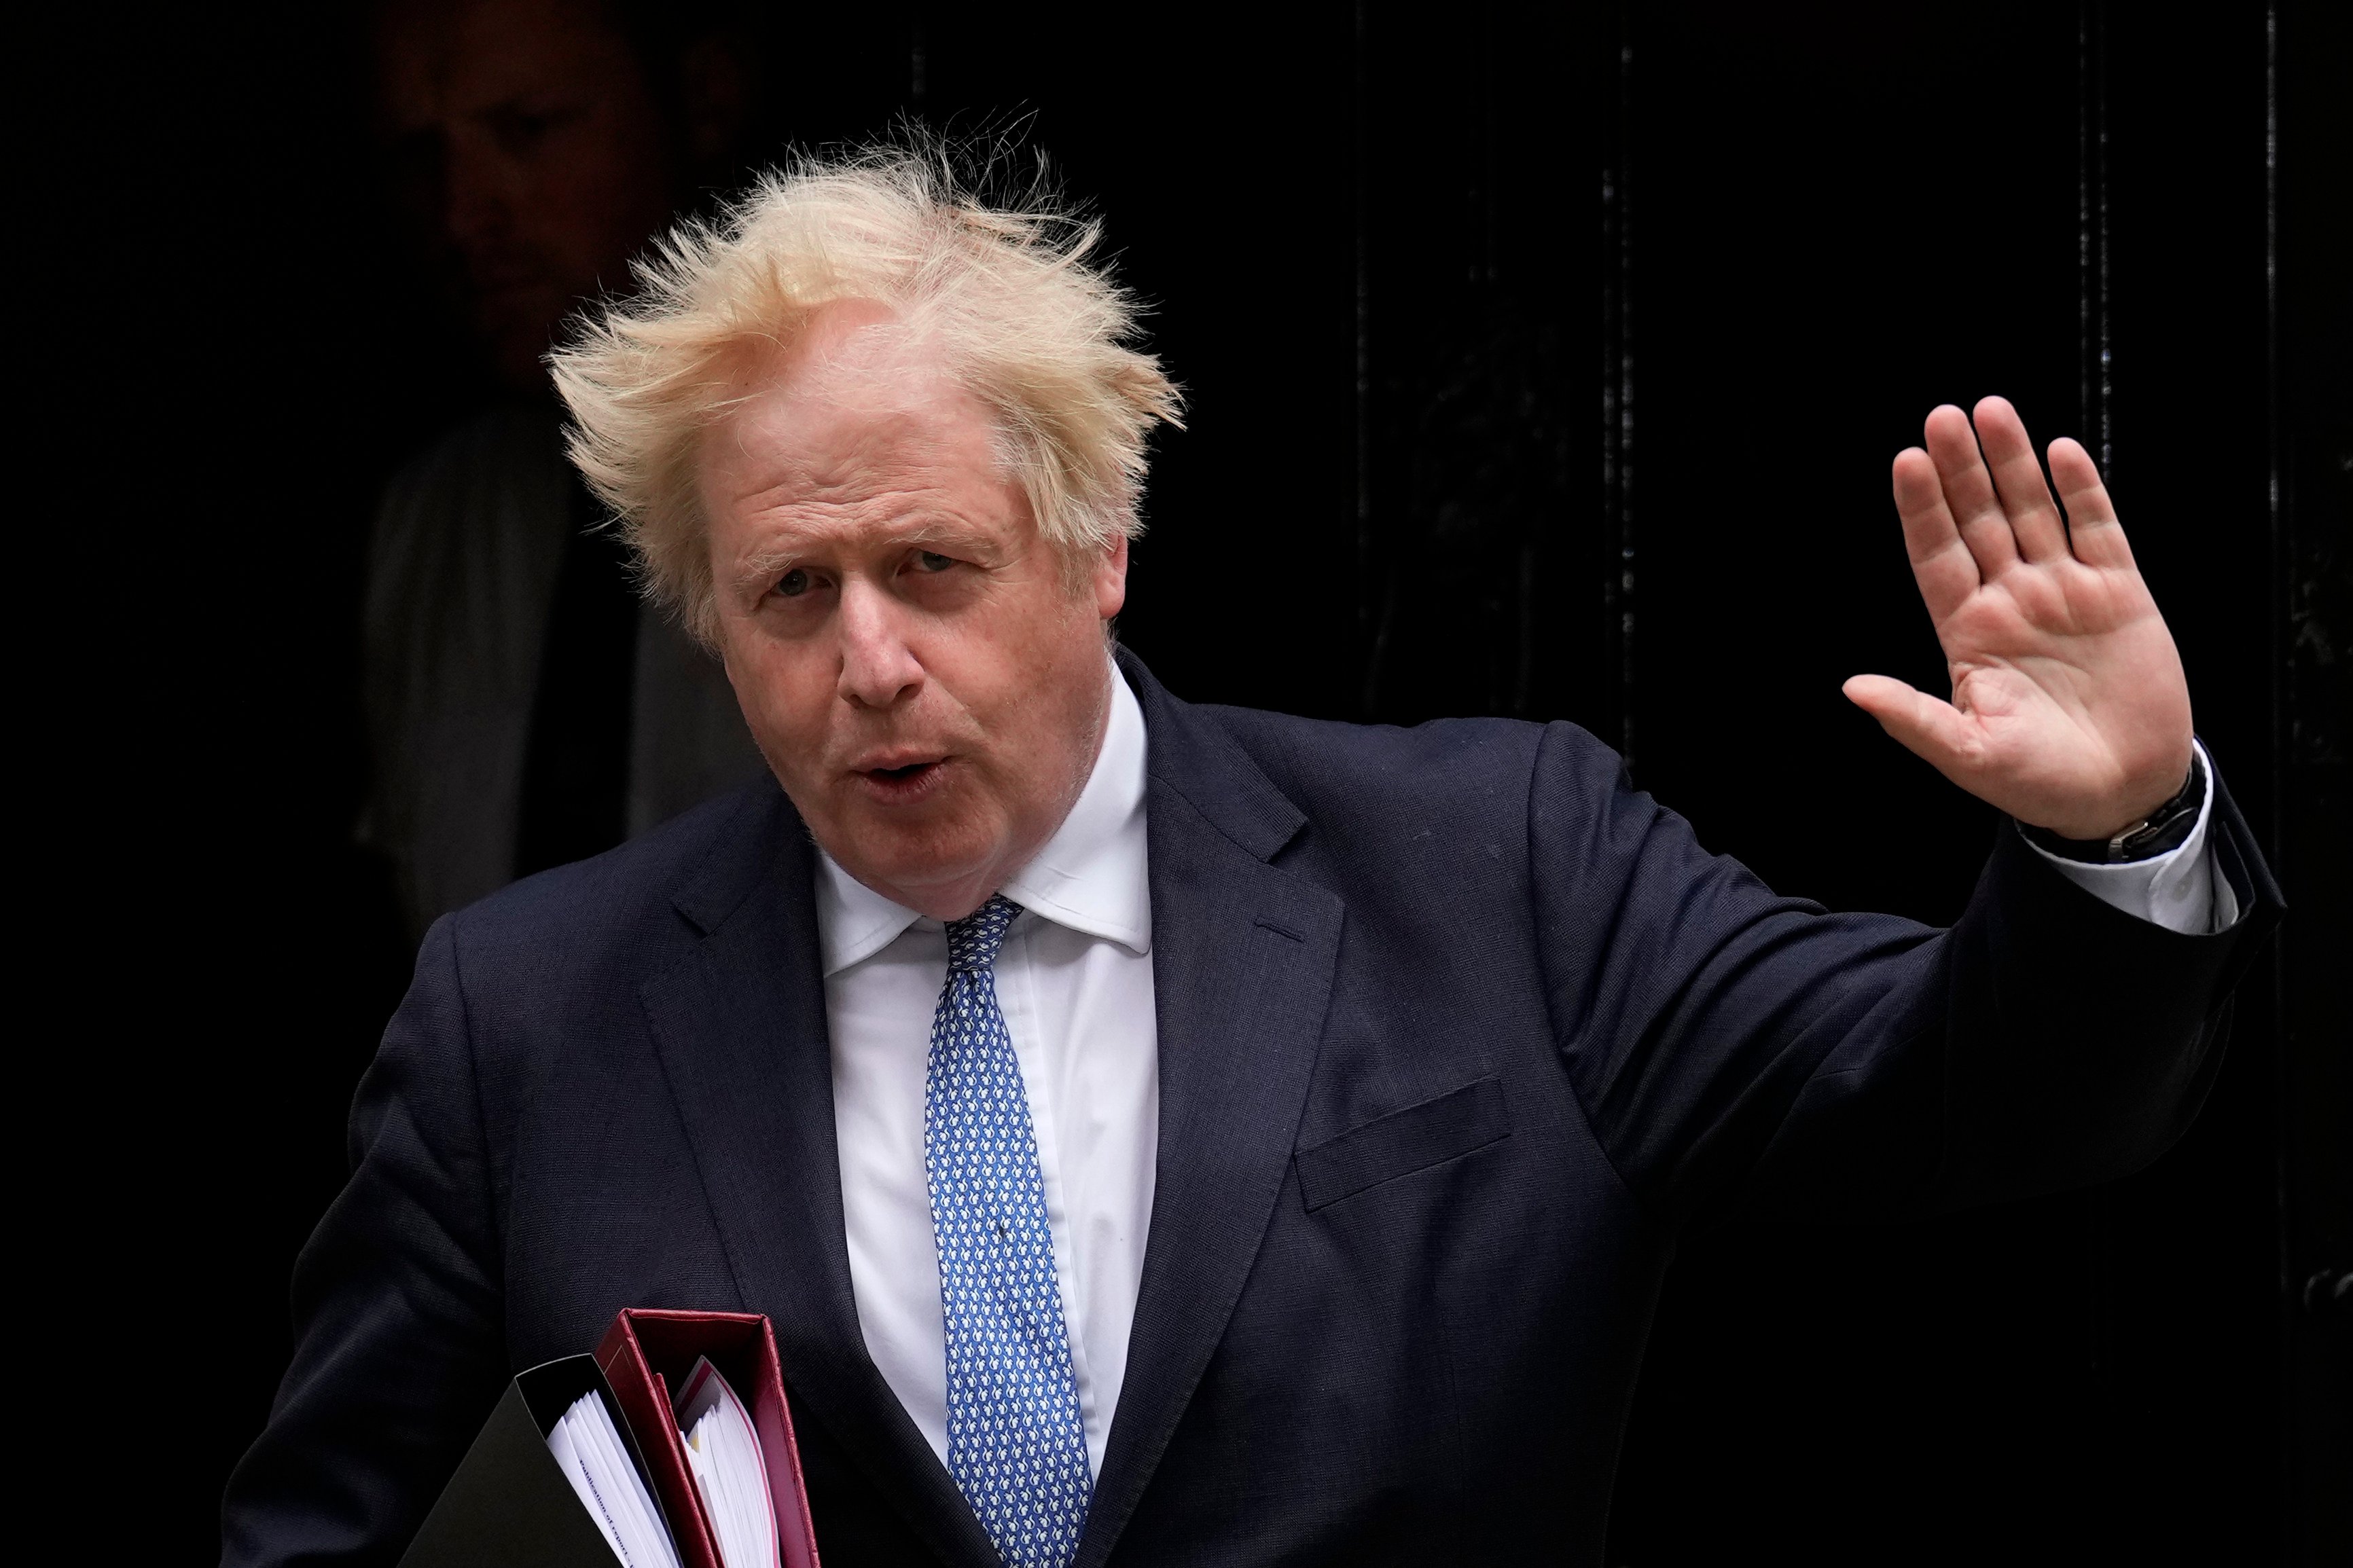 Boris Johnson’s chief scientific adviser said that the former UK prime minister struggled to come to grips with much of the science during the coronavirus pandemic. Photo: AP